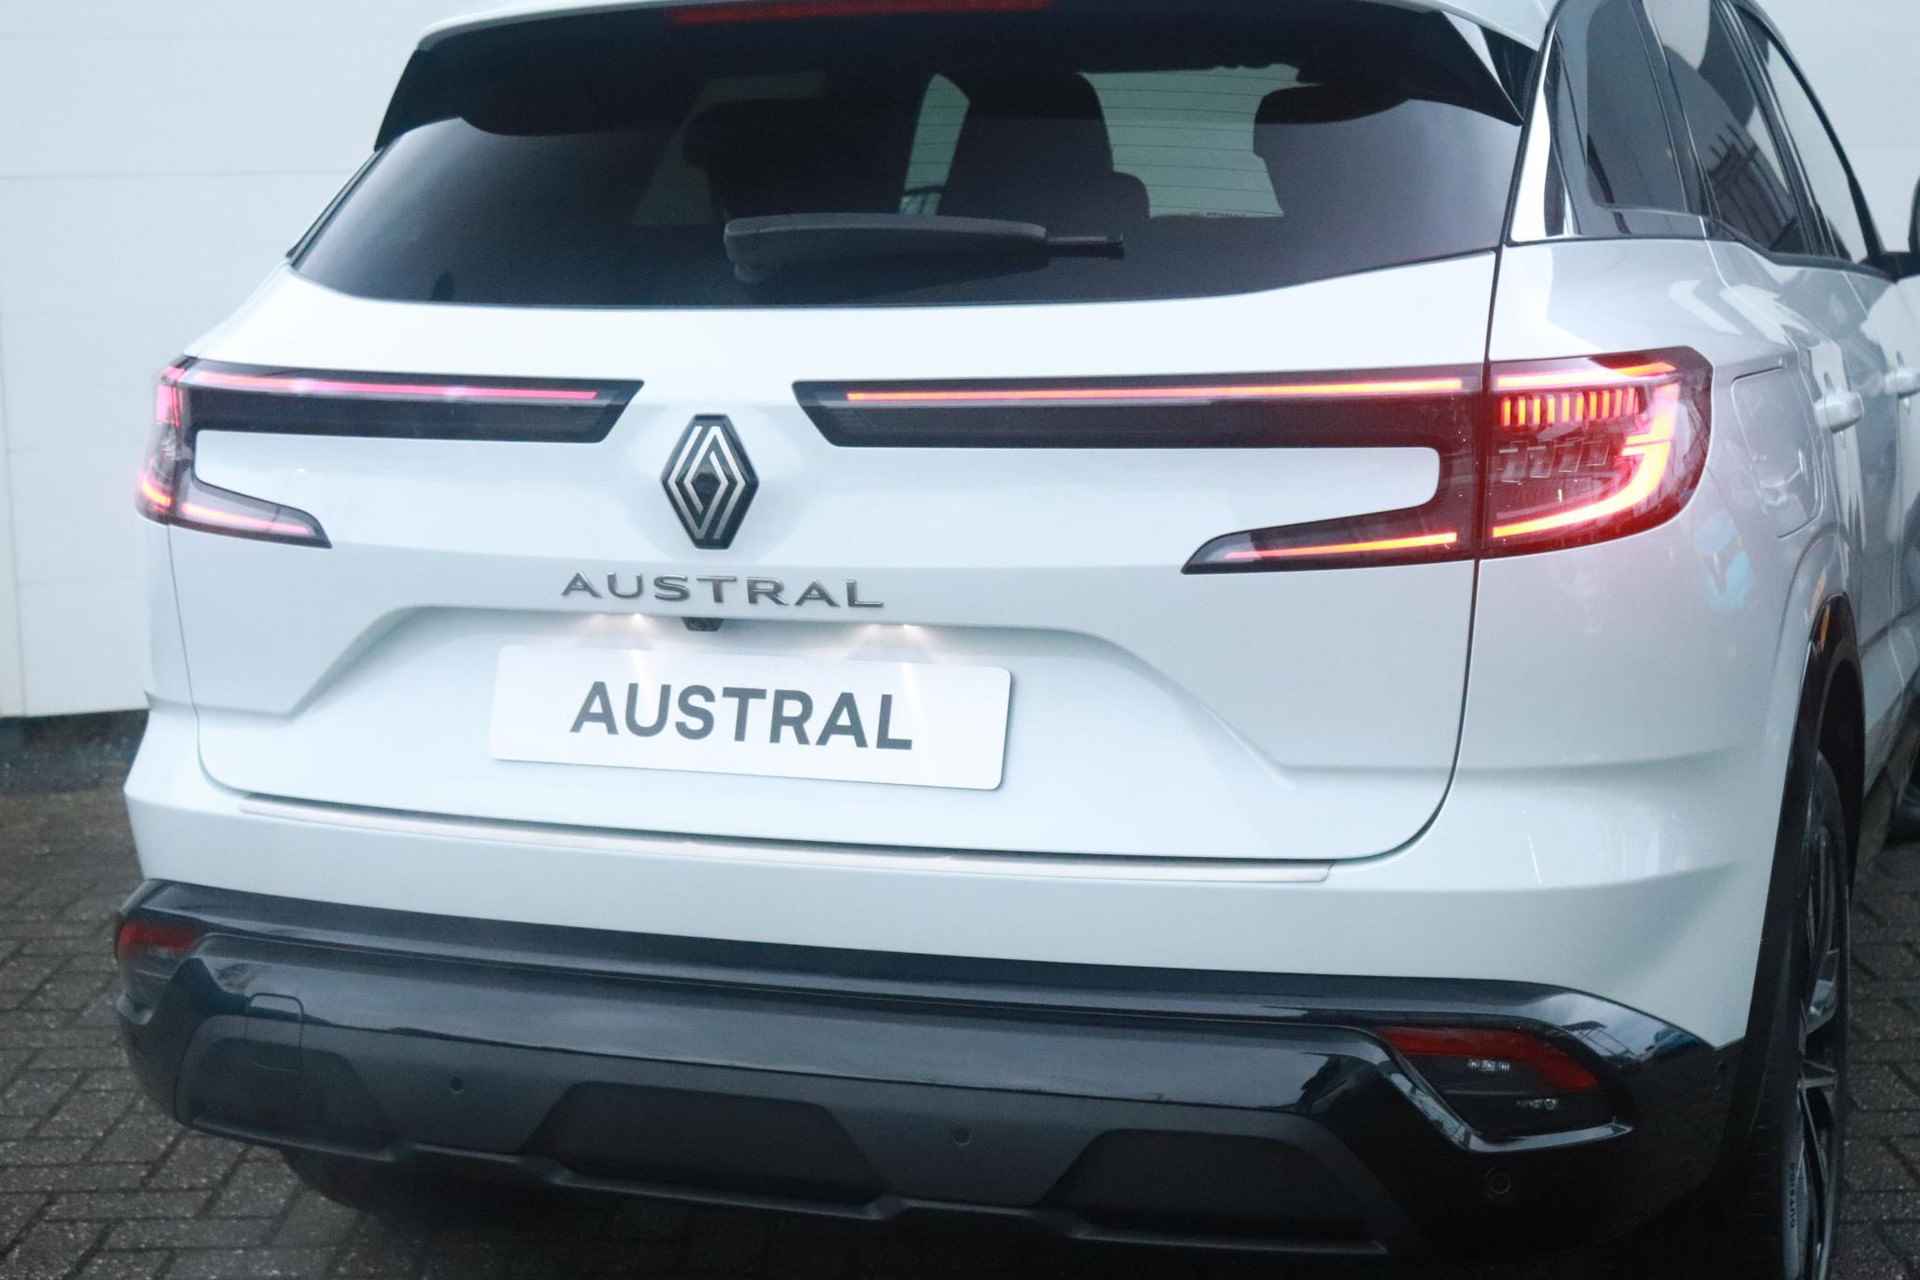 Renault Austral 1.2 Mild Hybrid 130 Techno Navigatie / Clima / PDC / Camera / Full LED / Apple Carplay of Android Auto - 7/36